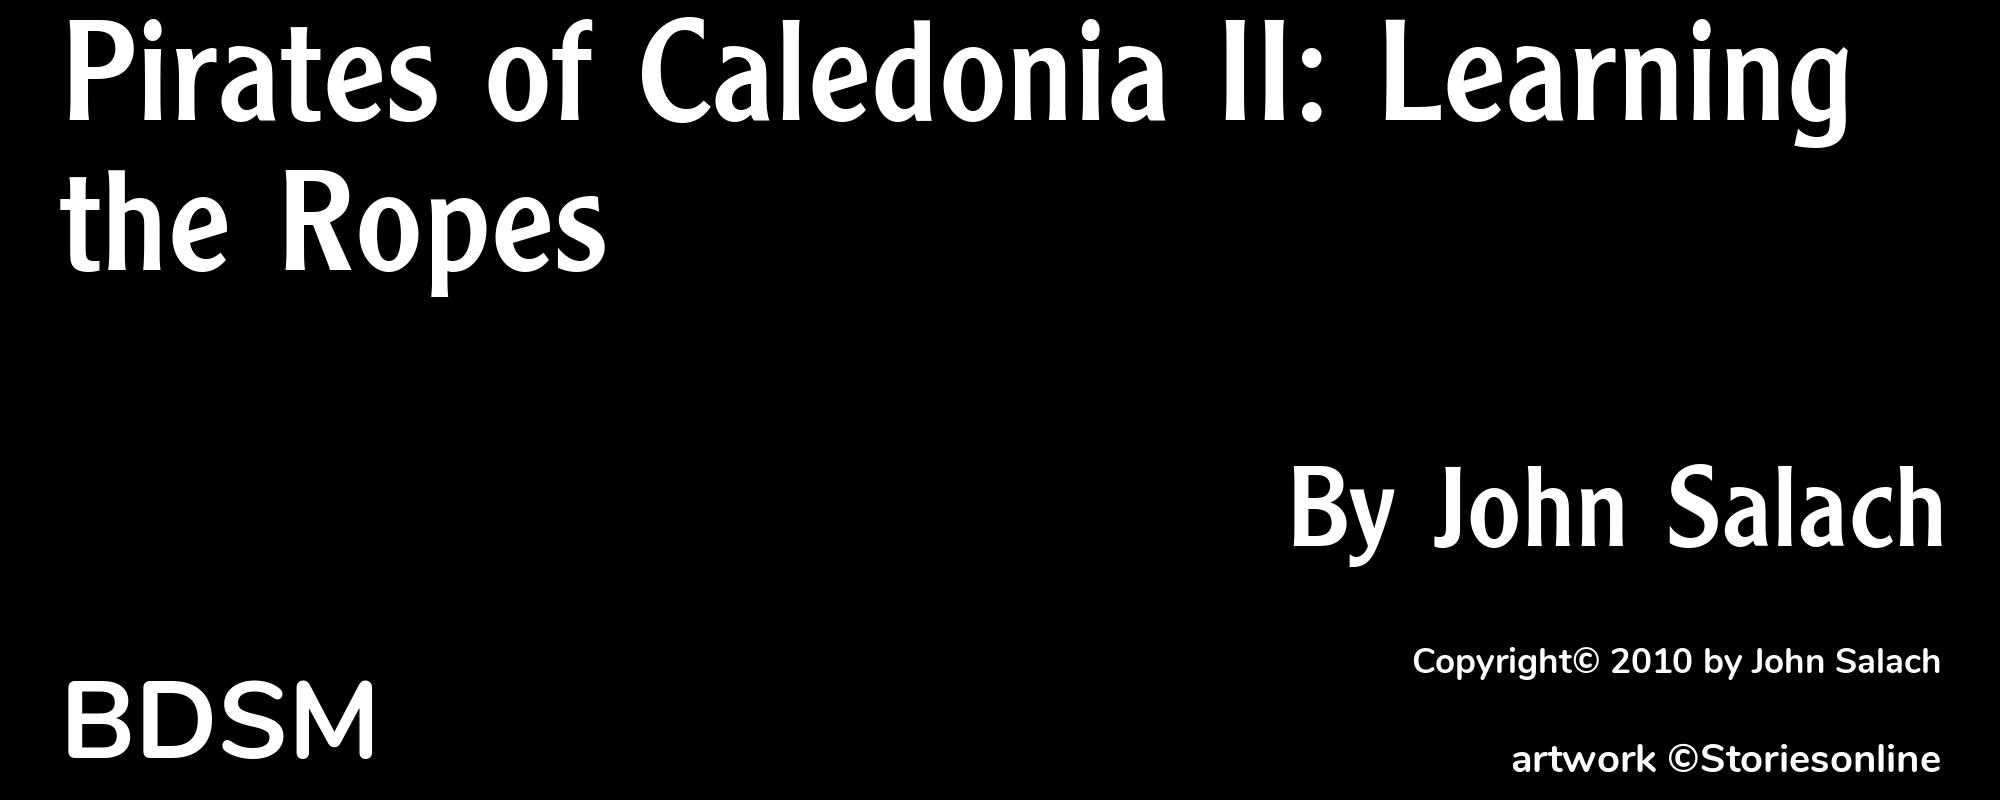 Pirates of Caledonia II: Learning the Ropes - Cover